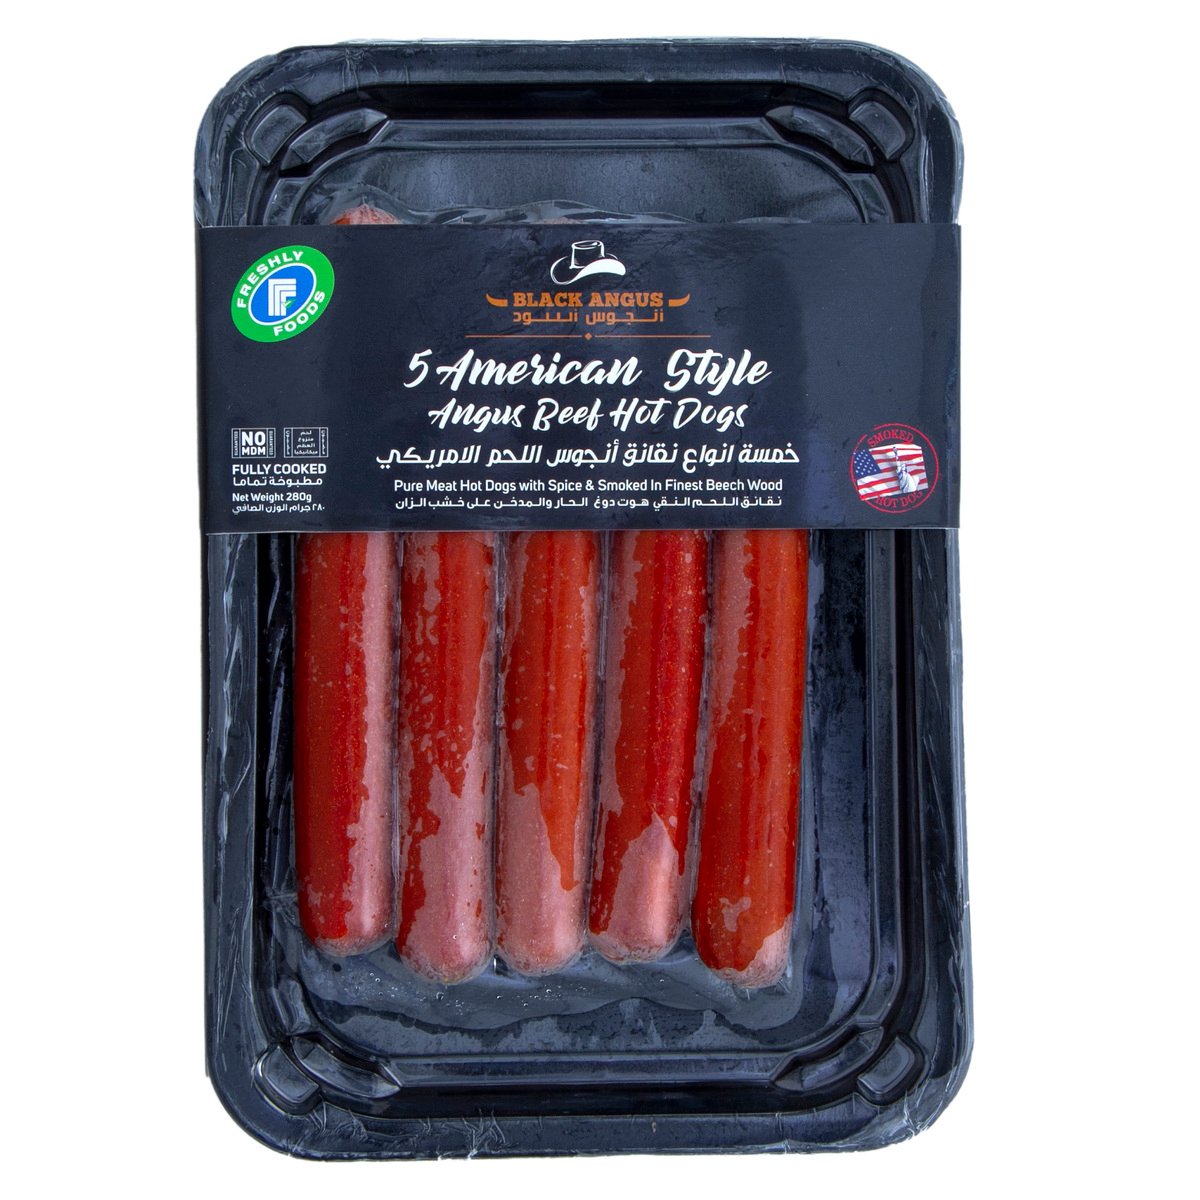 Freshly Foods 5 American Style Angus Beef Hot Dogs 280 g